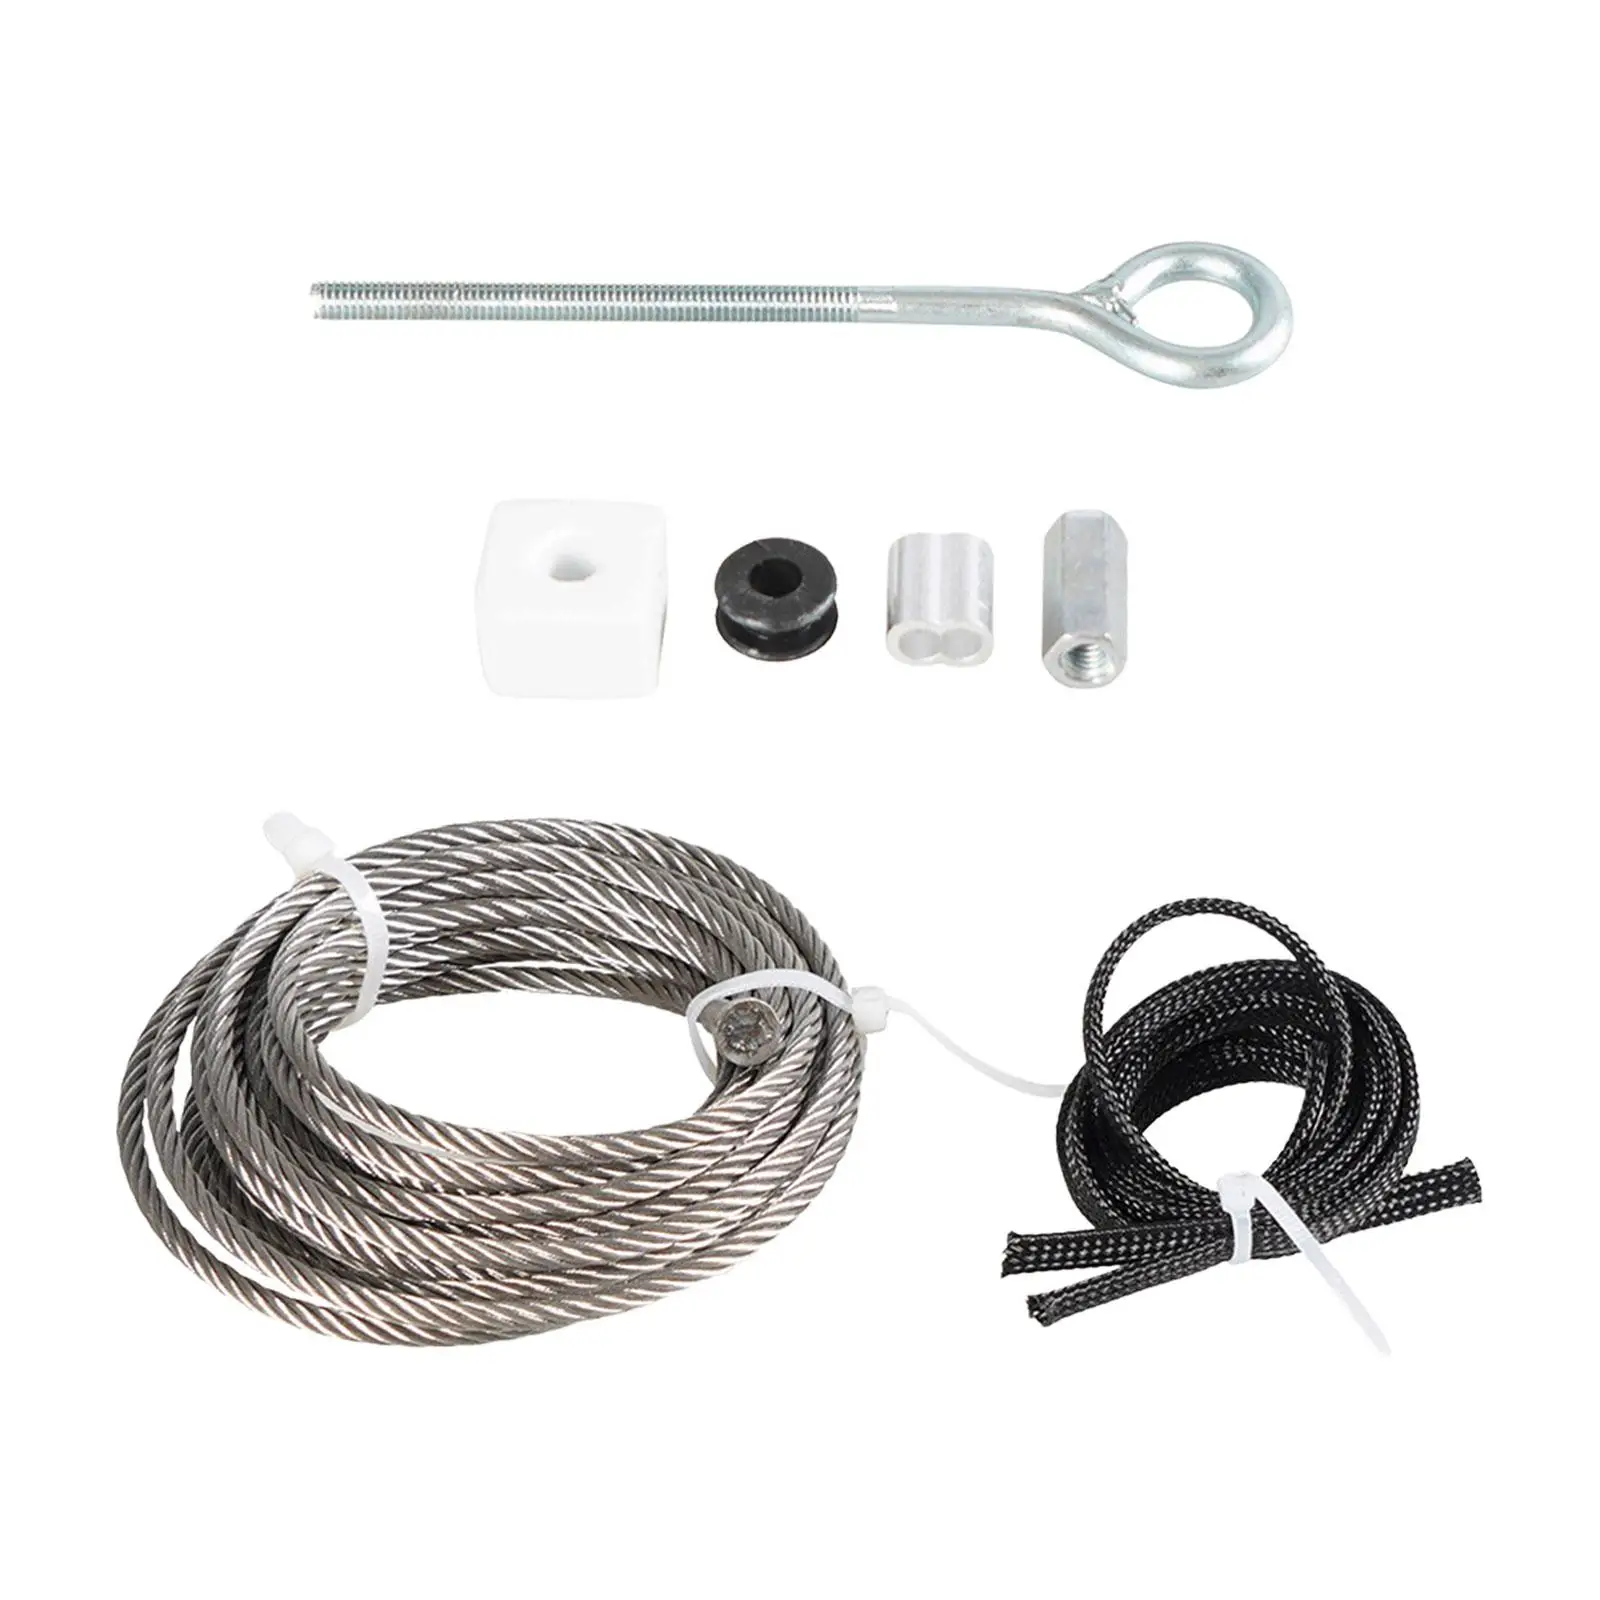 RV Cable Repair Set High Performance Easy to Install Universal Replacement Parts for Accuslide System